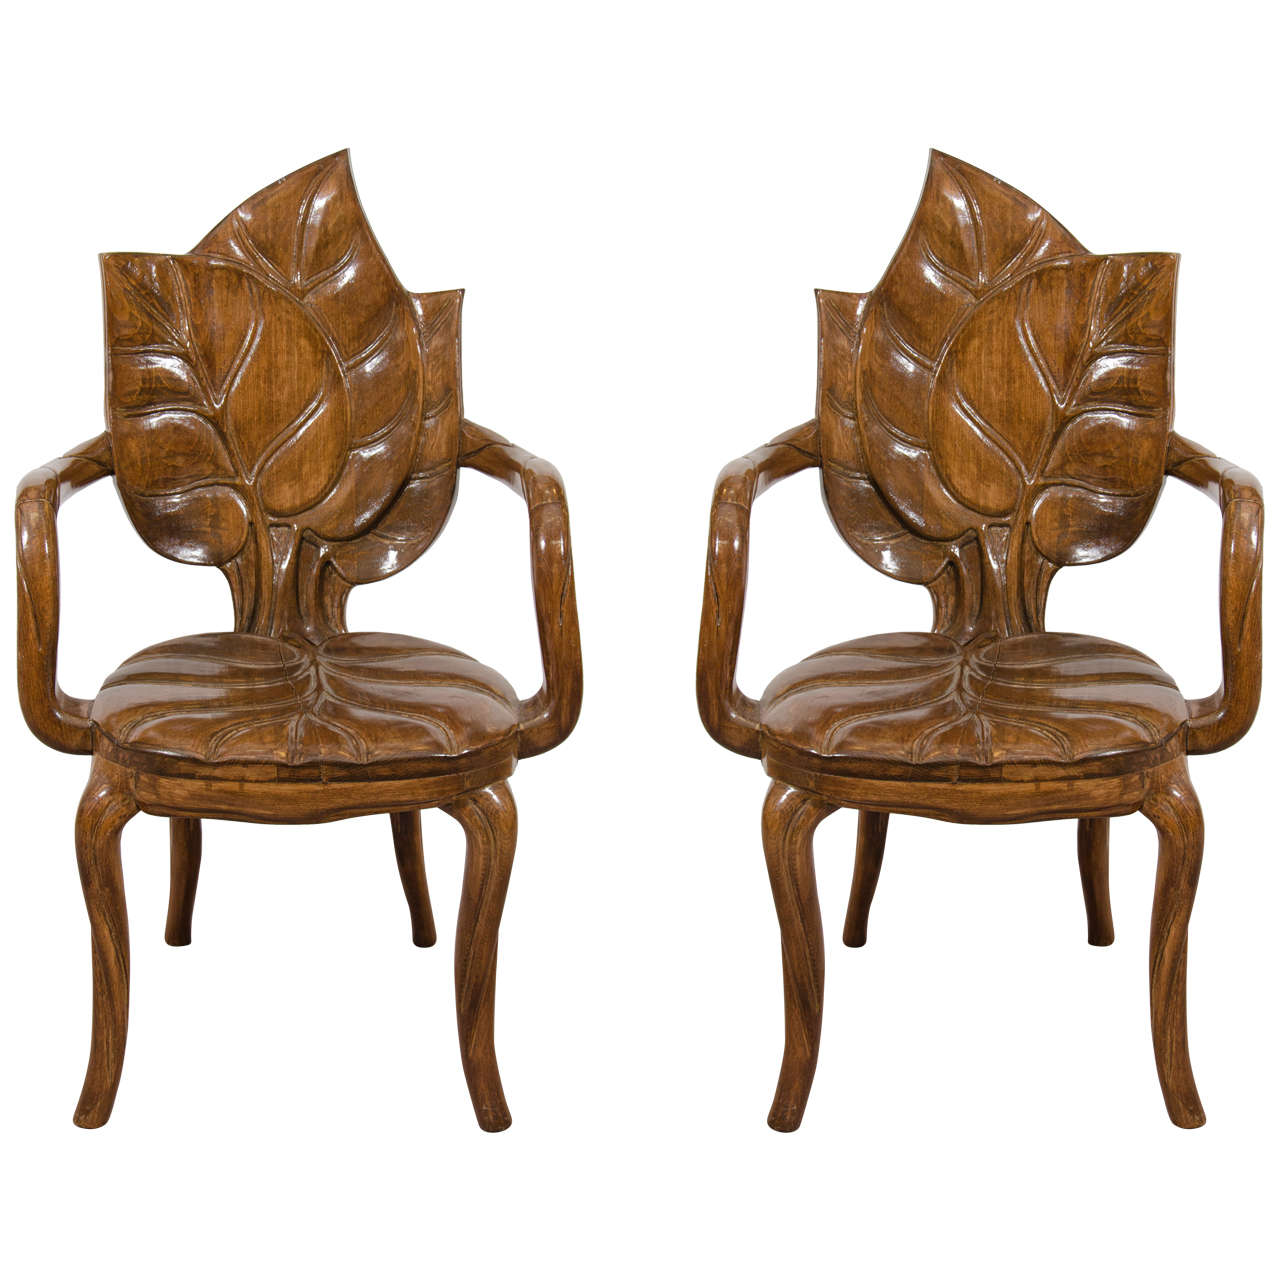 Art Nouveau Style, Pair of Sculptural Leaf Motif Armchairs or Side Chairs  For Sale at 1stDibs | art nouveau furniture style, art nouveau style  furniture, modern art nouveau furniture